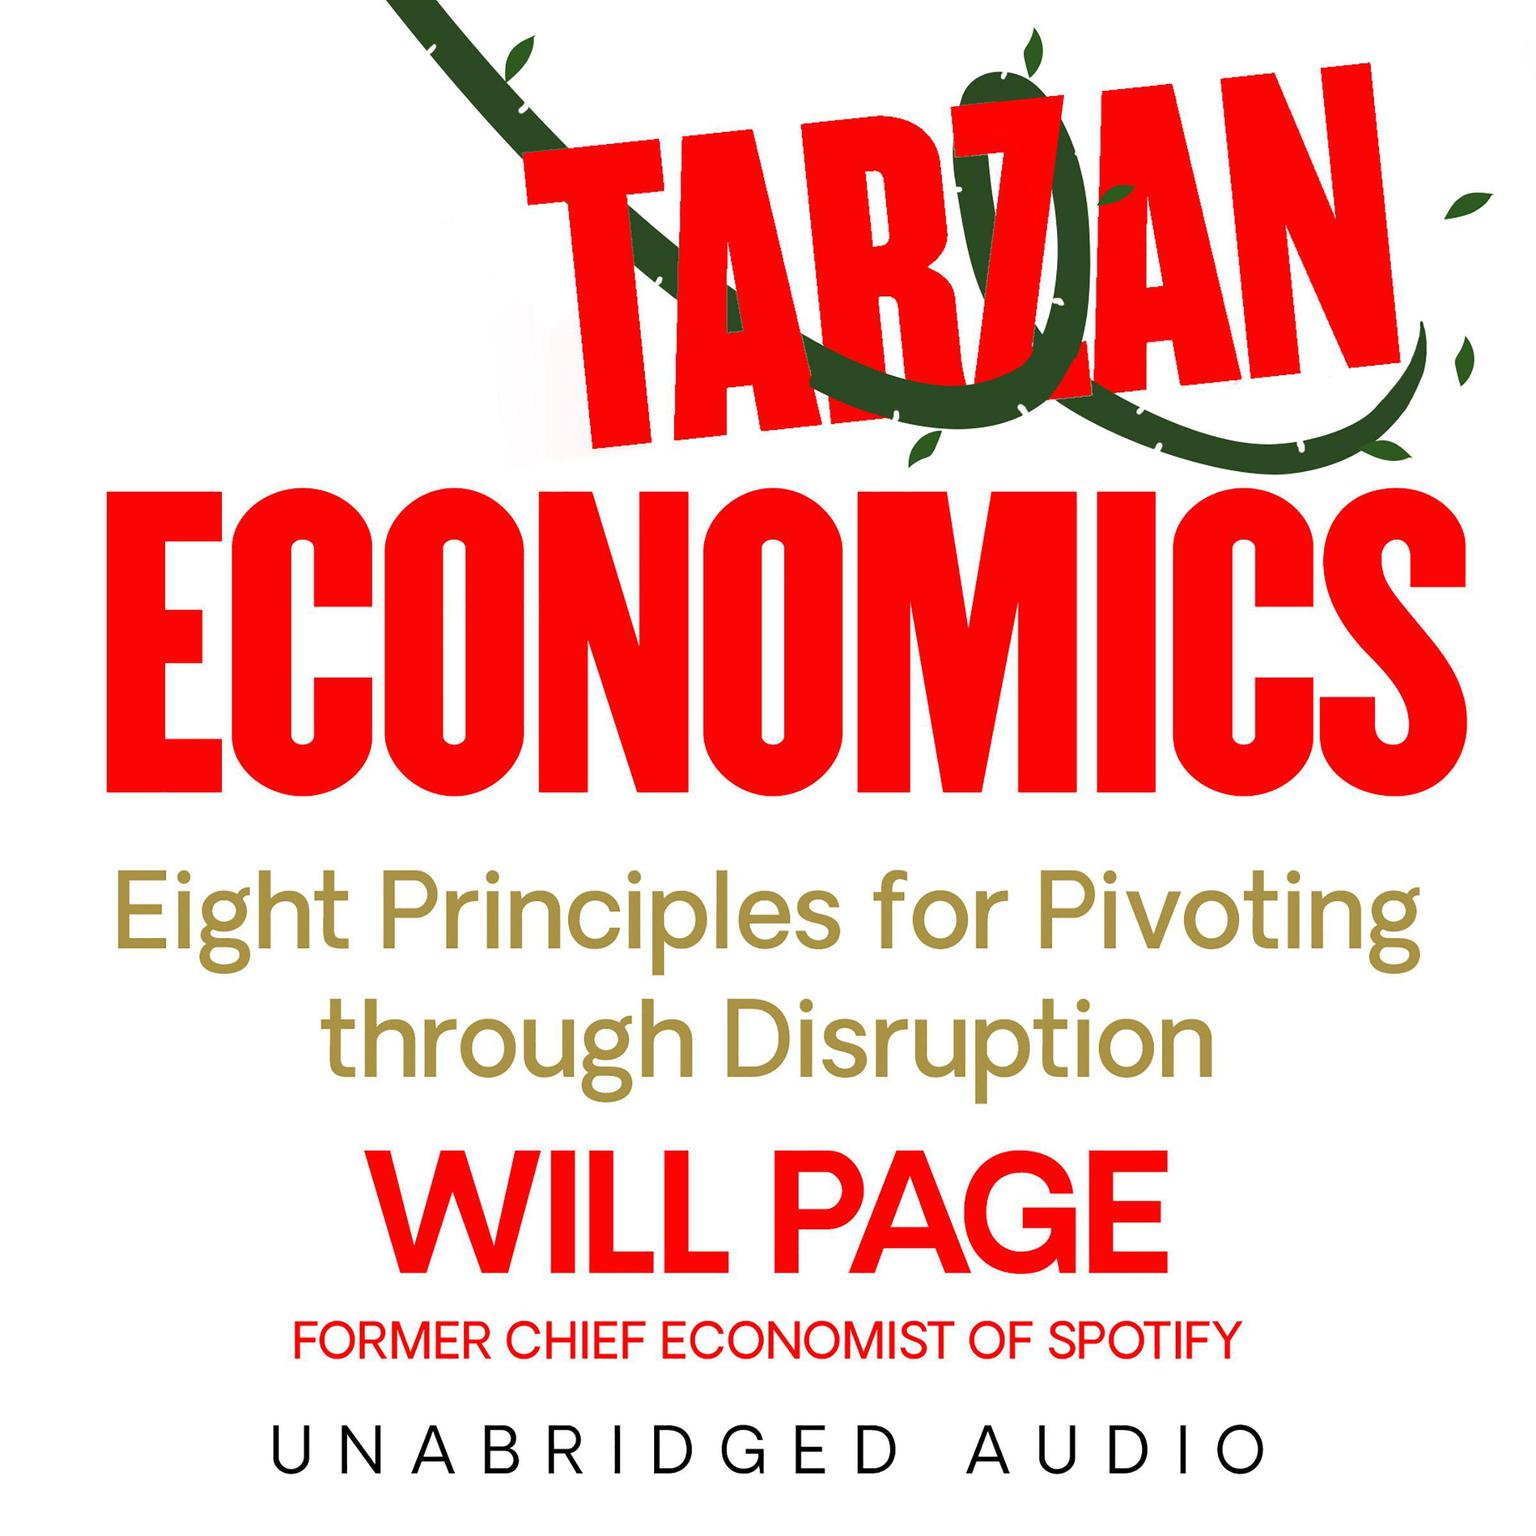 Tarzan Economics: Eight Principles for Pivoting through Disruption Audiobook, by Will Page